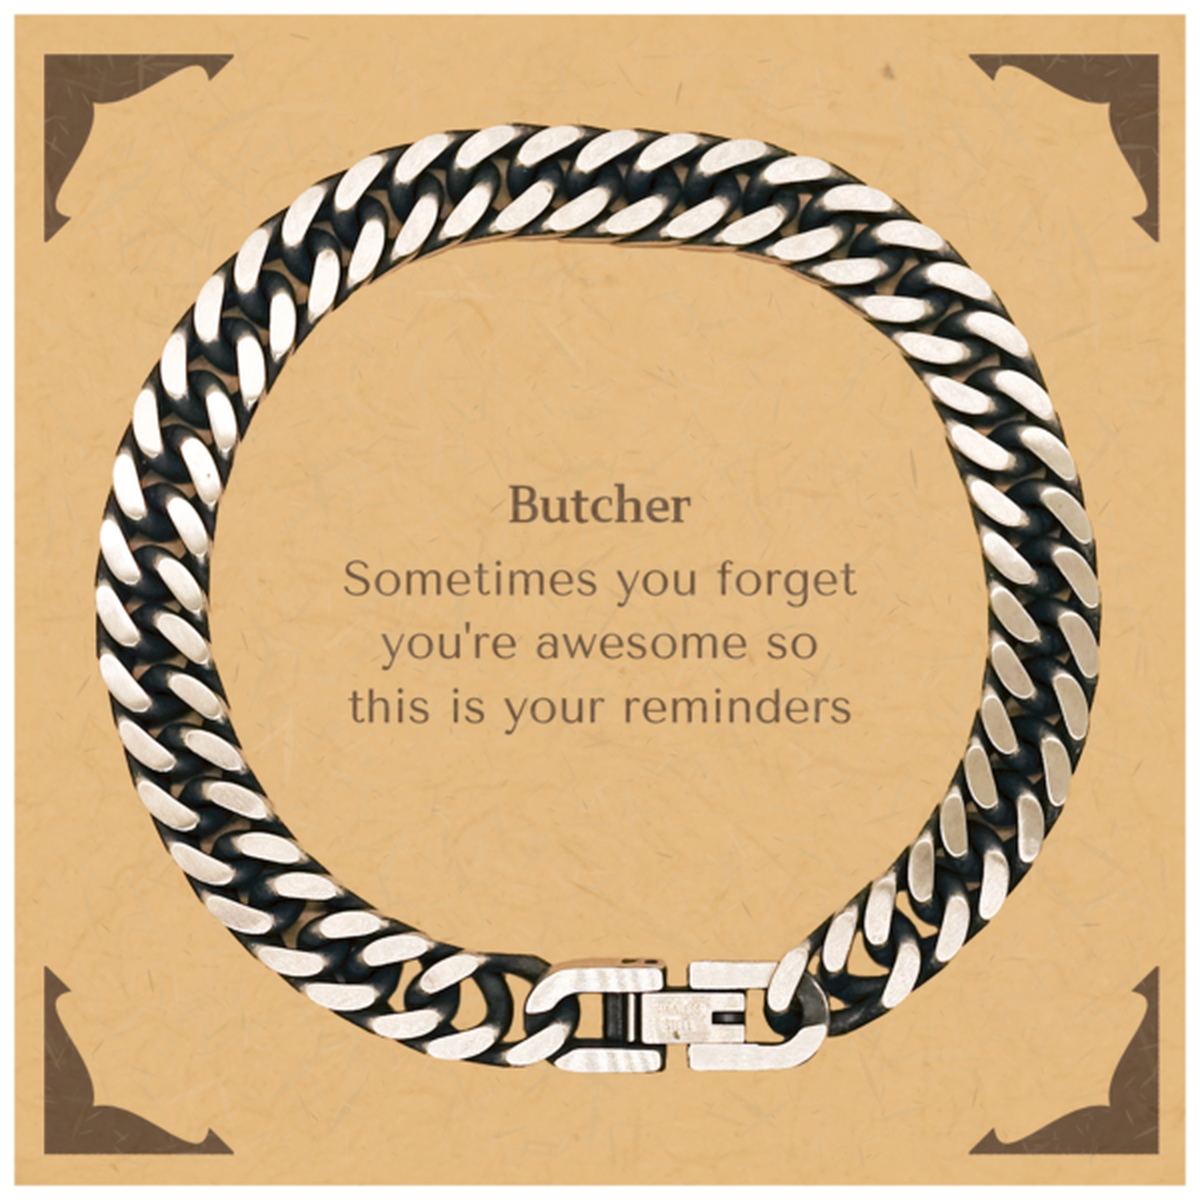 Sentimental Butcher Cuban Link Chain Bracelet, Butcher Sometimes you forget you're awesome so this is your reminders, Graduation Christmas Birthday Gifts for Butcher, Men, Women, Coworkers